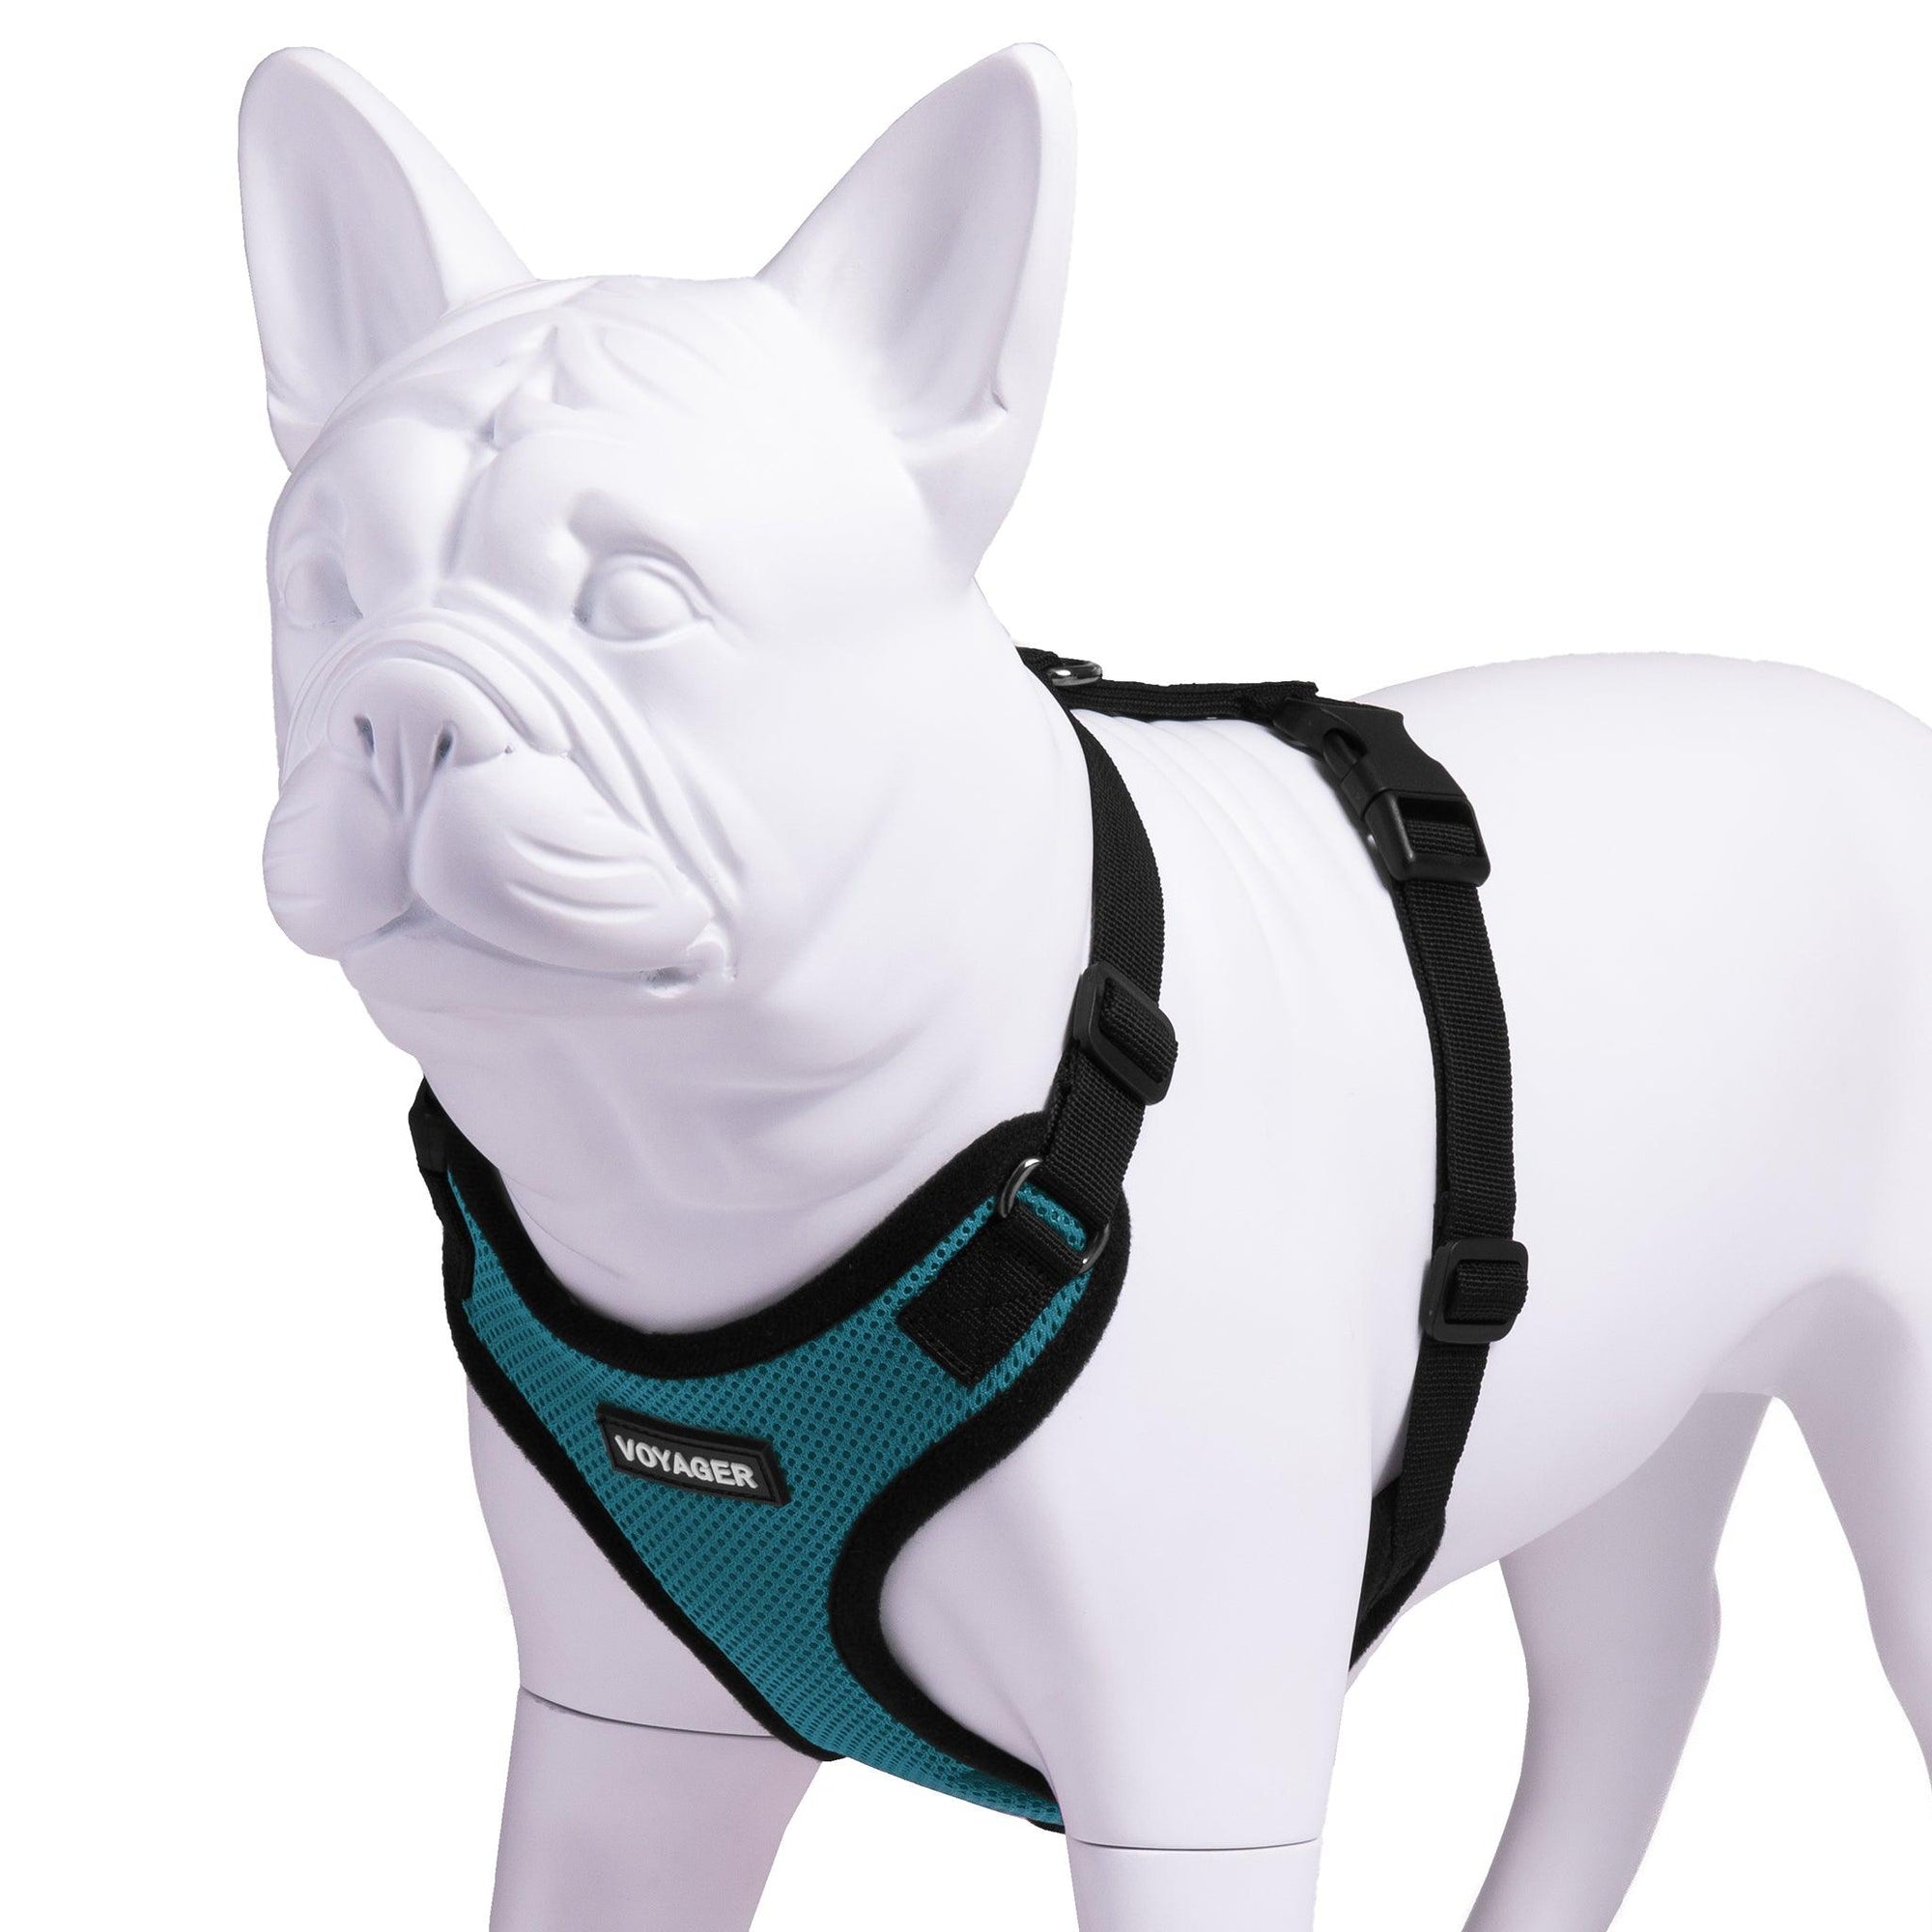 VOYAGER Step-In Lock Dog Harness in Turquoise with Black Trim and Webbing - Expanded